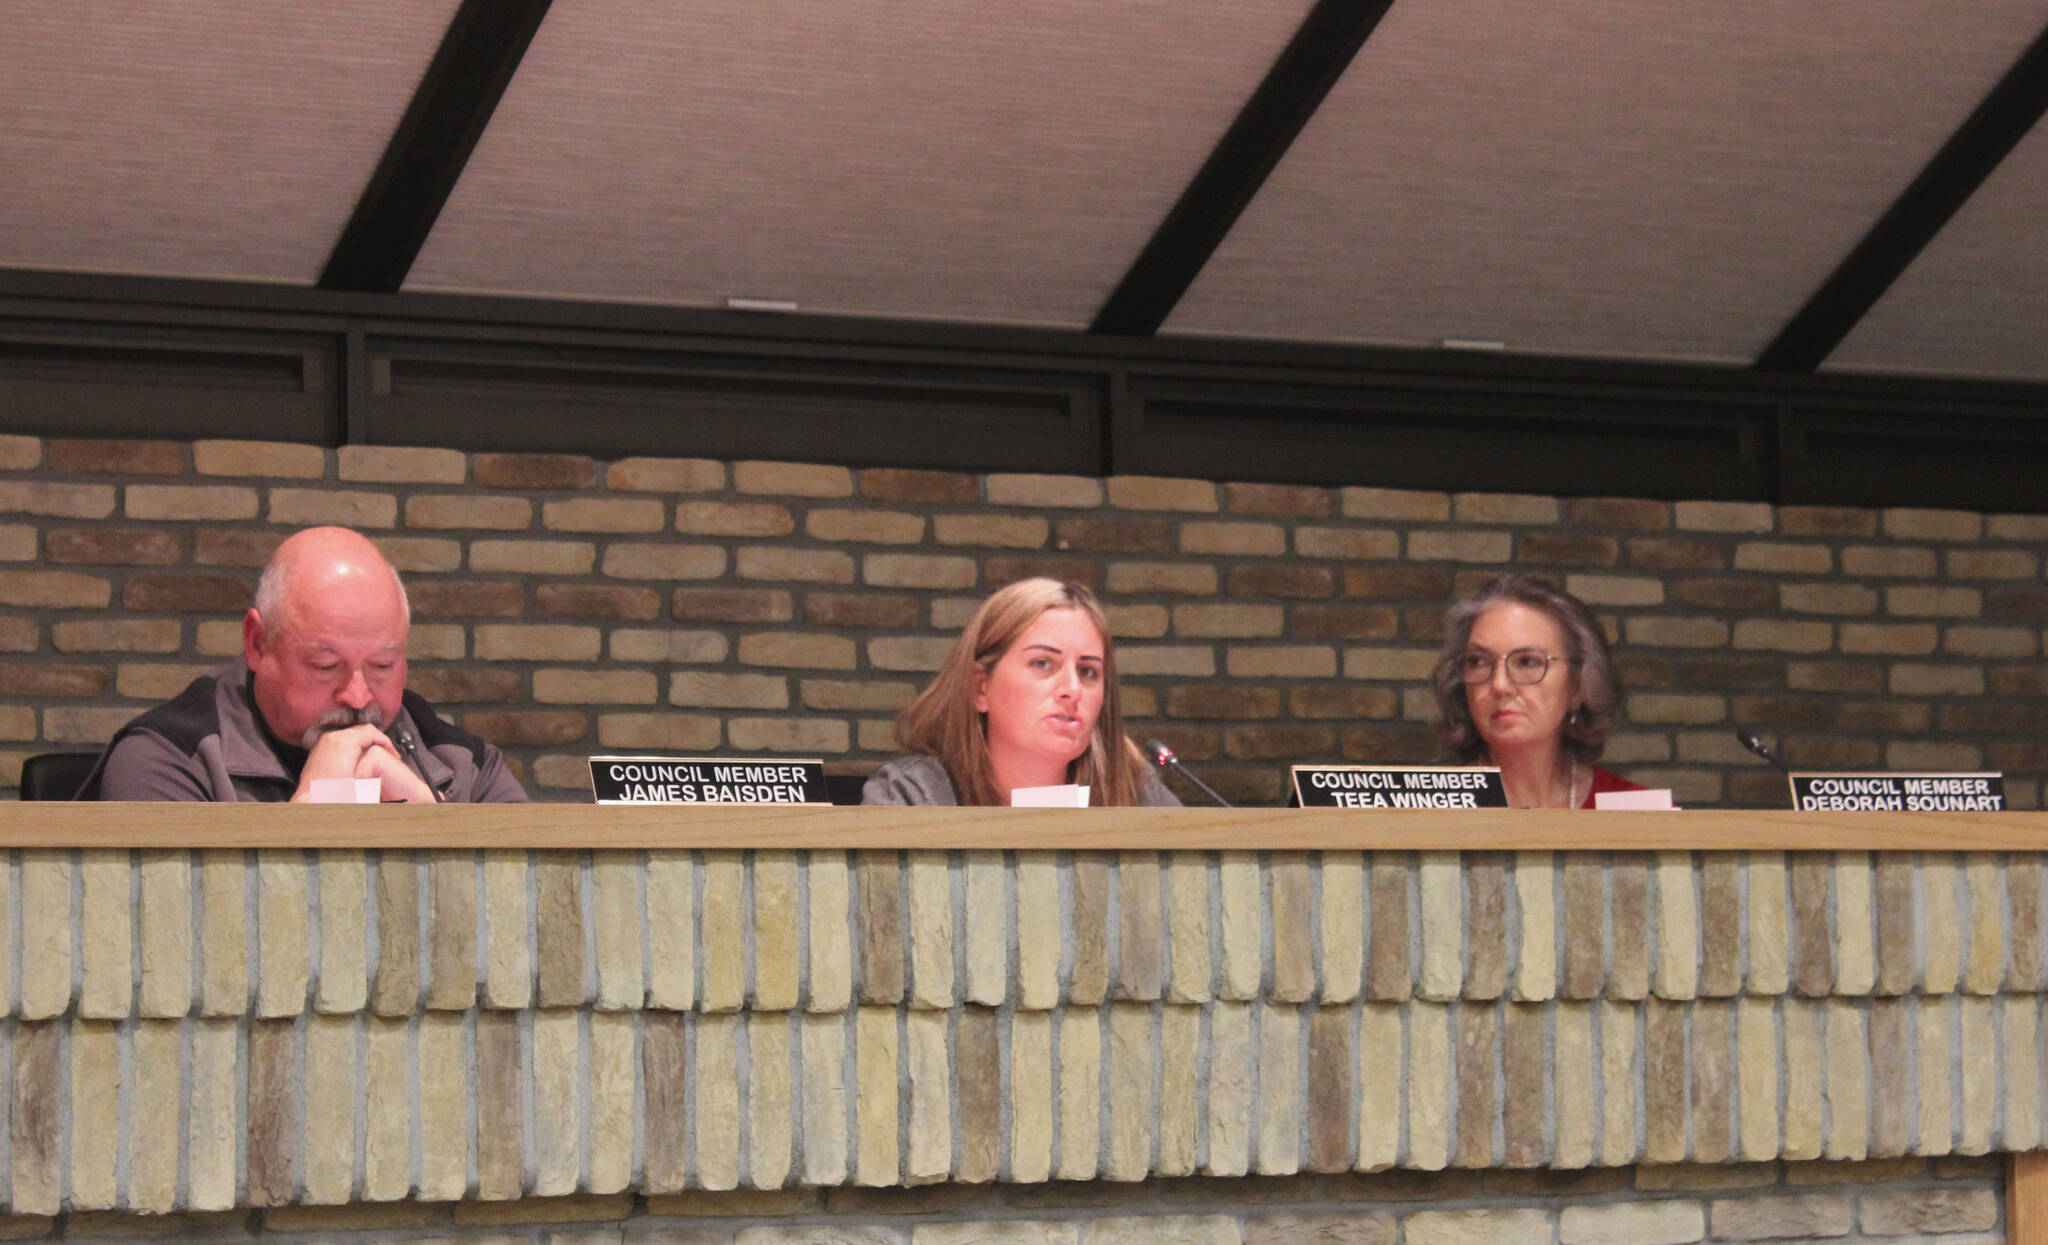 Kenai City Council members James Baisden (left) and Deborah Sounart (right) listen as member Teea Winger (center) speaks in support of legislation opposing government COVID-19 mandates, during a meeting of the Kenai City Council on Wednesday, in Kenai.